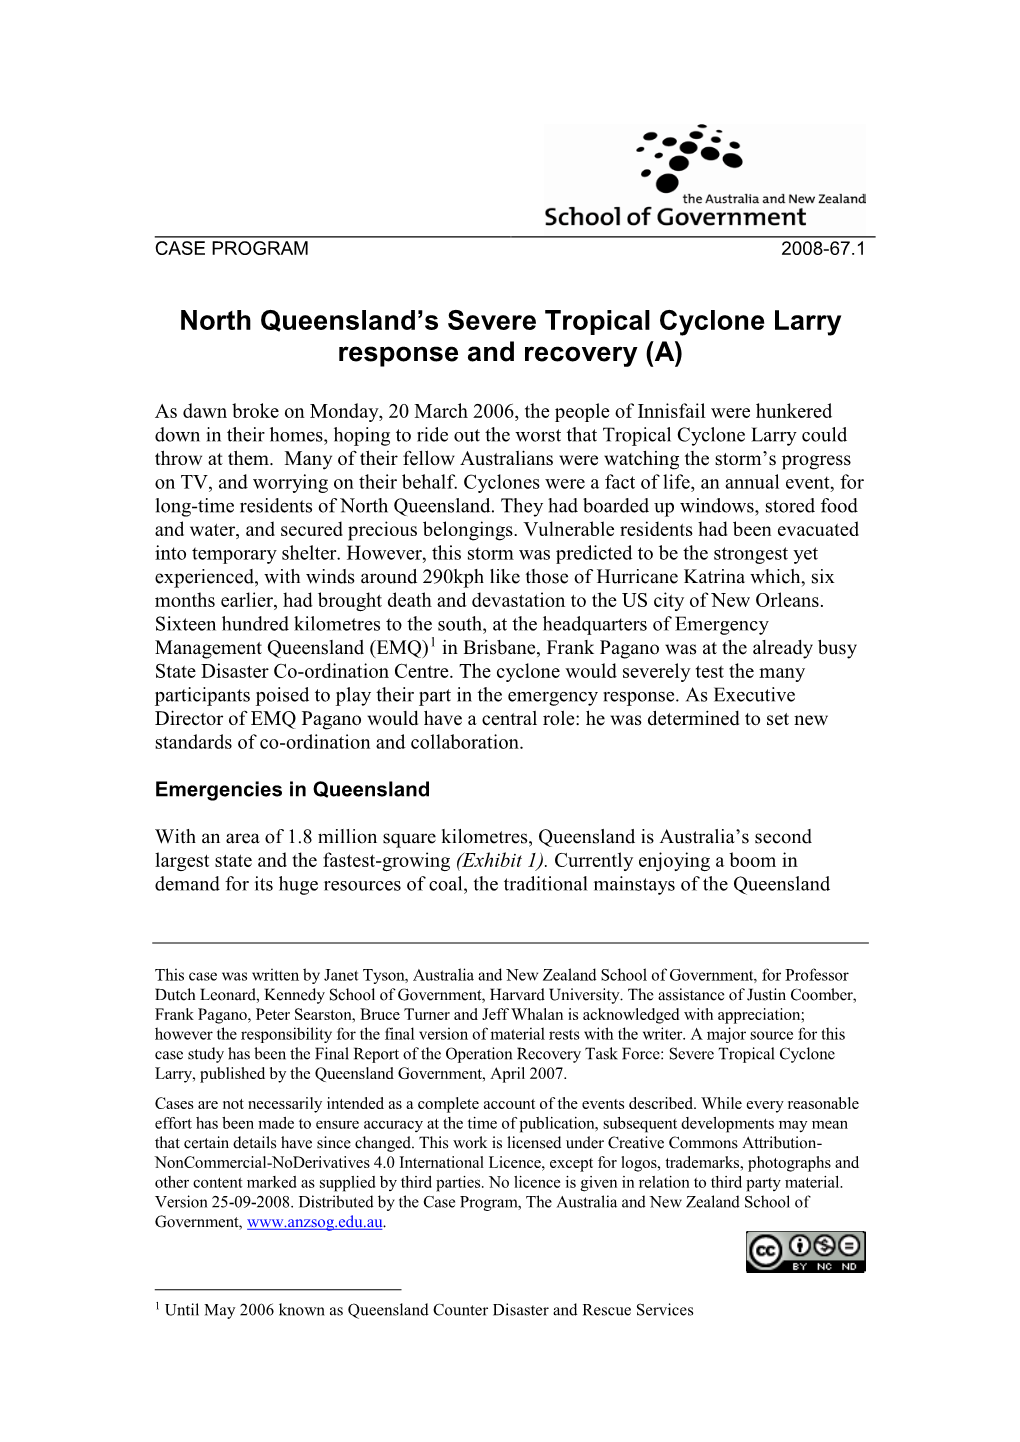 North Queensland's Severe Tropical Cyclone Larry Response and Recovery